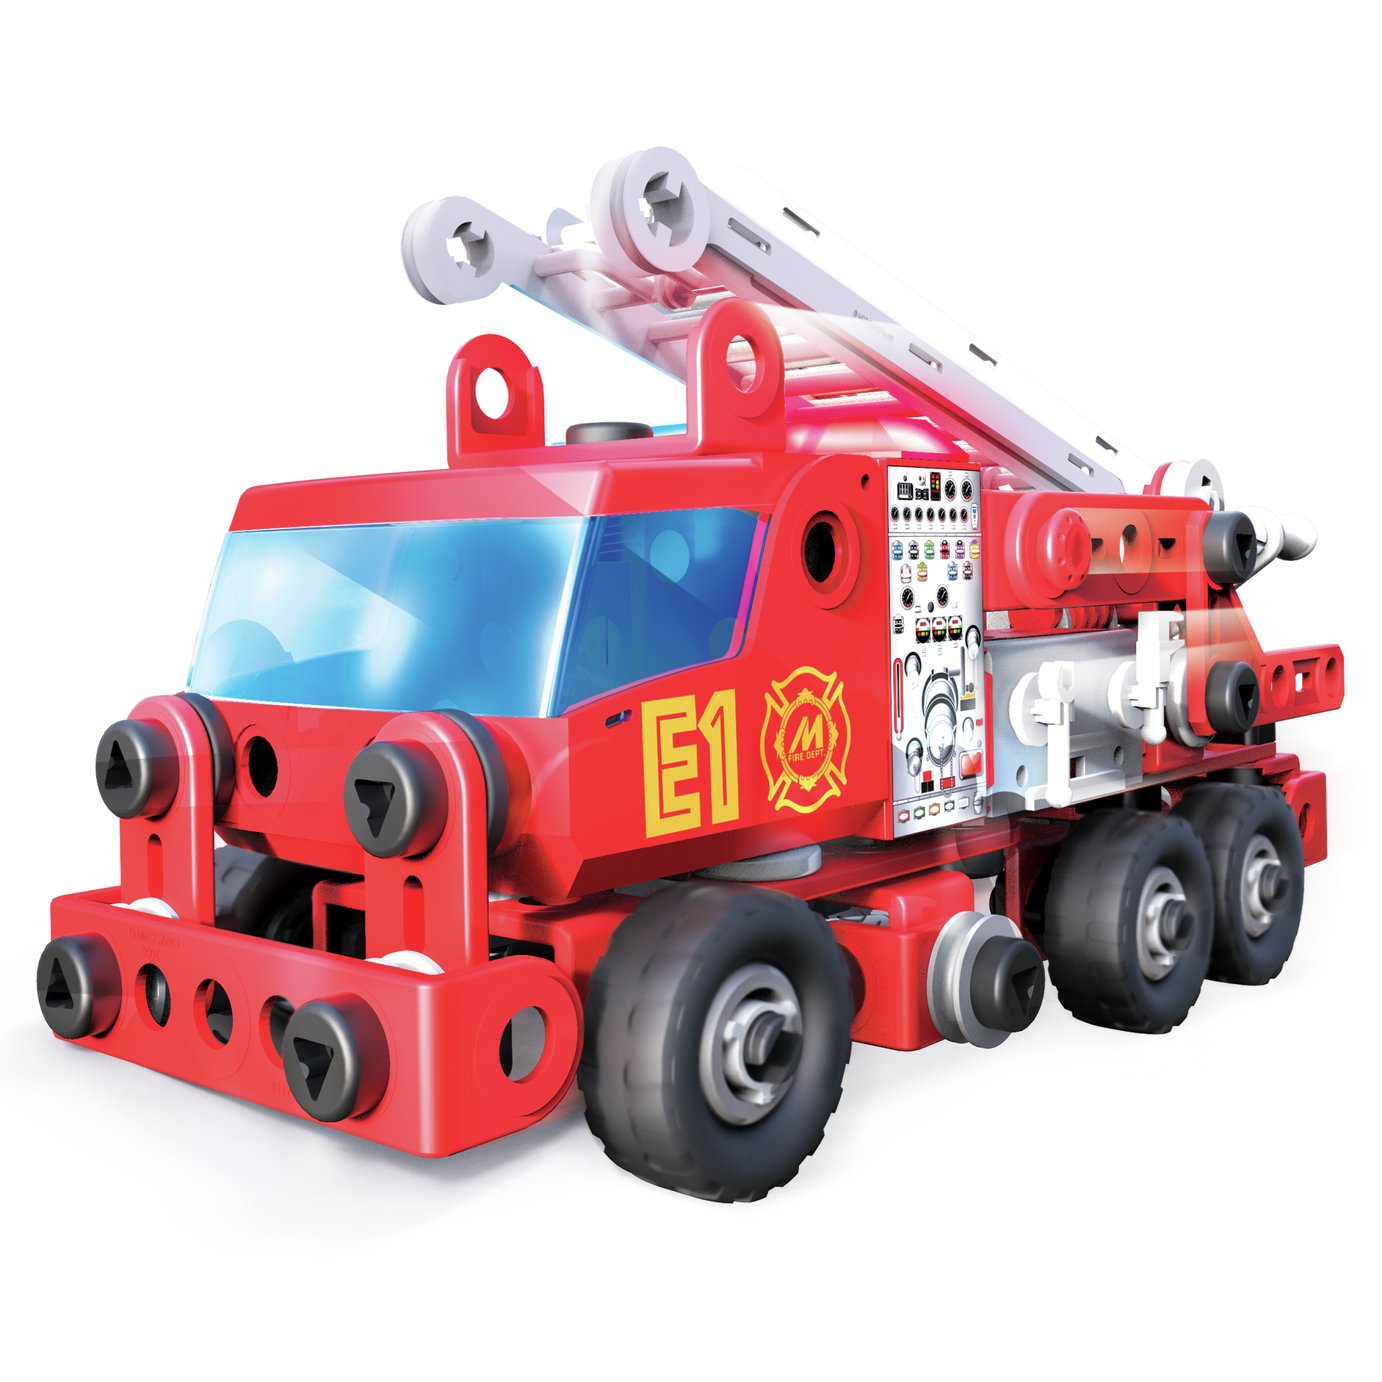 Meccano Junior Fire Engine Vehicle Review